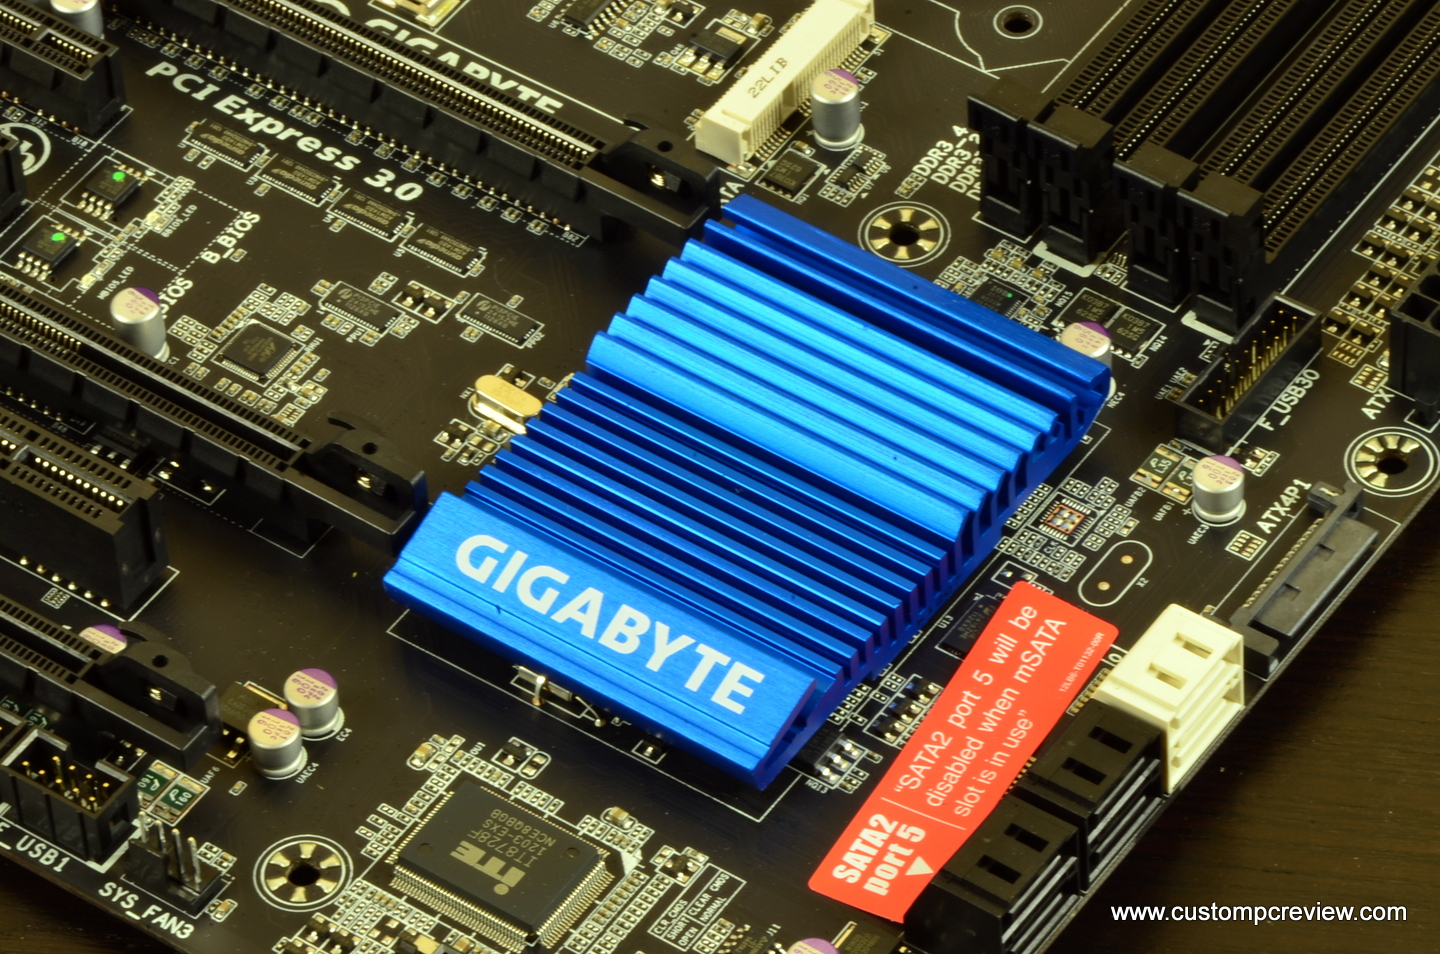 Gigabyte Z77X-UD3H Motherboard Review